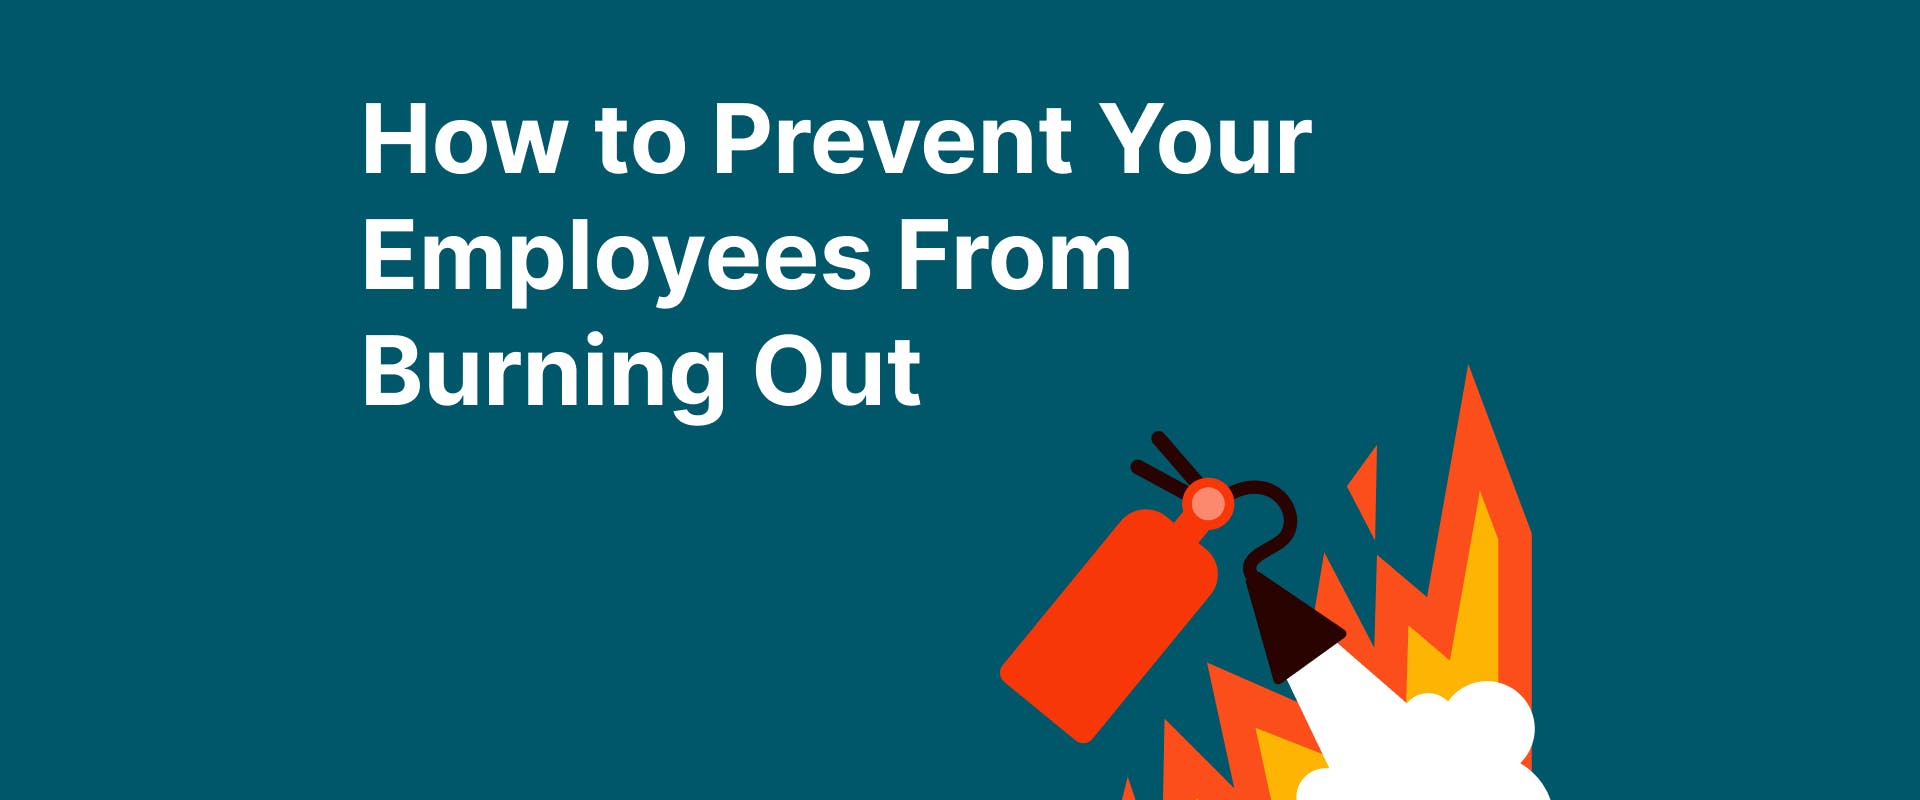 How to Prevent Your Employees From Burning Out - Headway App